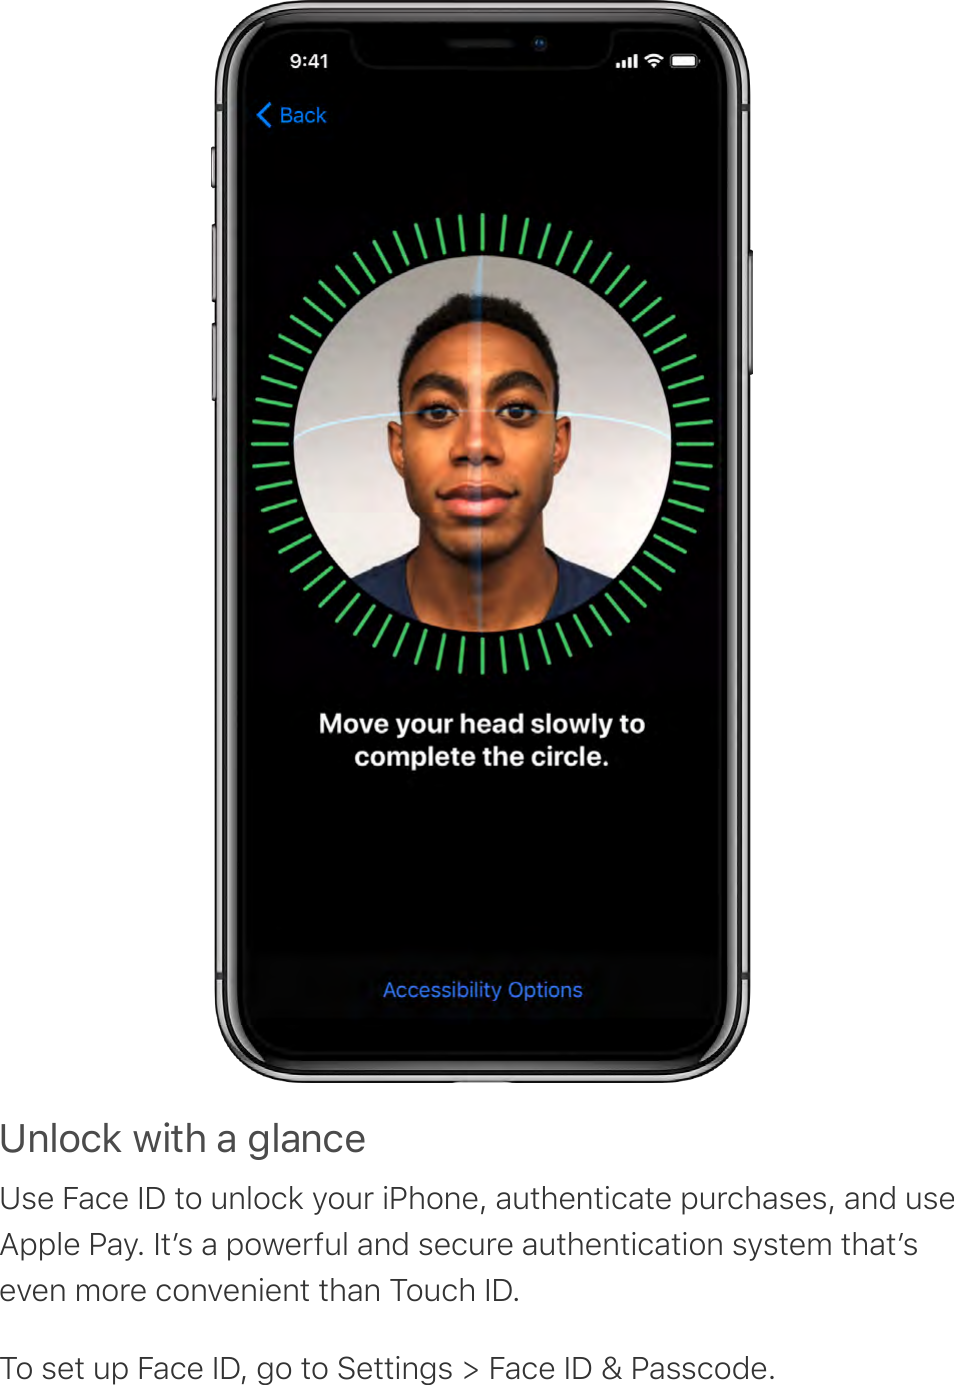 1%.$/2&apos;3!*#&apos;-&apos;4.-%/&amp;Use Face ID to unlock your iPhone, authenticate purchases, and useApple Pay. Itʼs a powerful and secure authentication system thatʼseven more convenient than Touch ID.To set up Face ID, go to Settings &gt; Face ID &amp; Passcode.